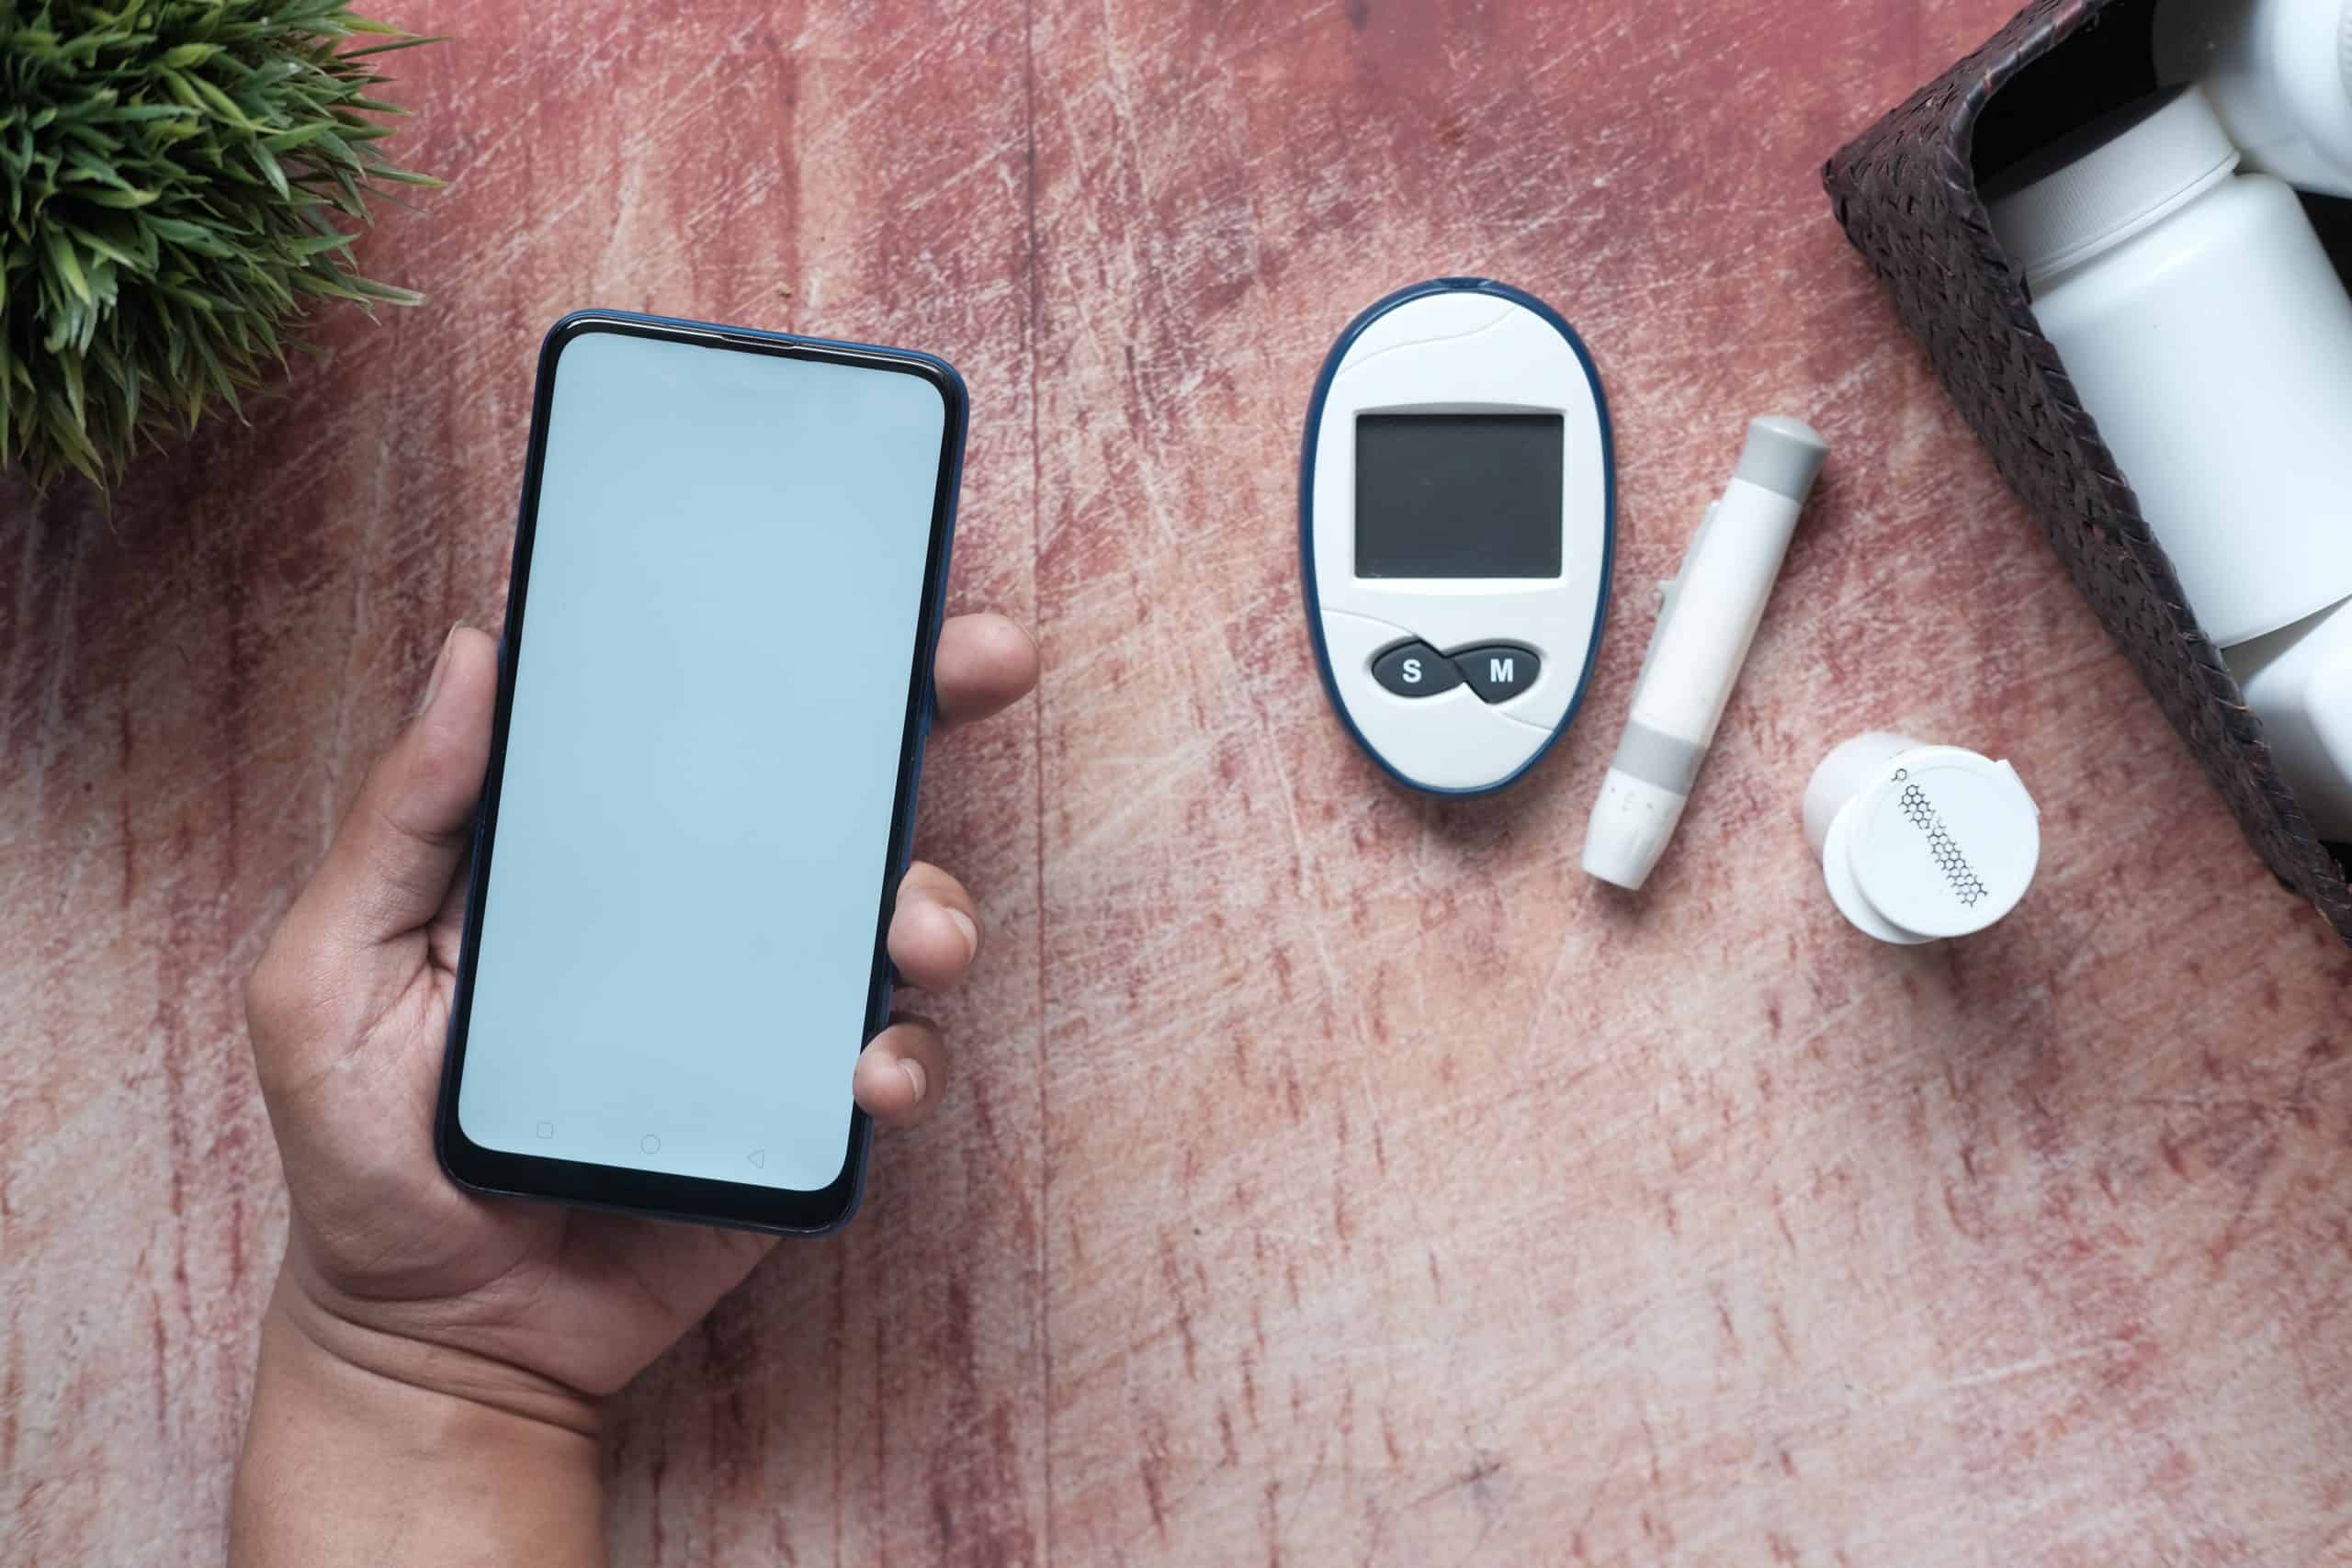 Globally, diabetes impacts a vast populace; astounding figures in the US reveal 34.2 million (CDC) or 10% of individuals afflicted. Diabetics, therefore, are compelled to maintain constant access to trustworthy and exceptional supplies for condition management. 